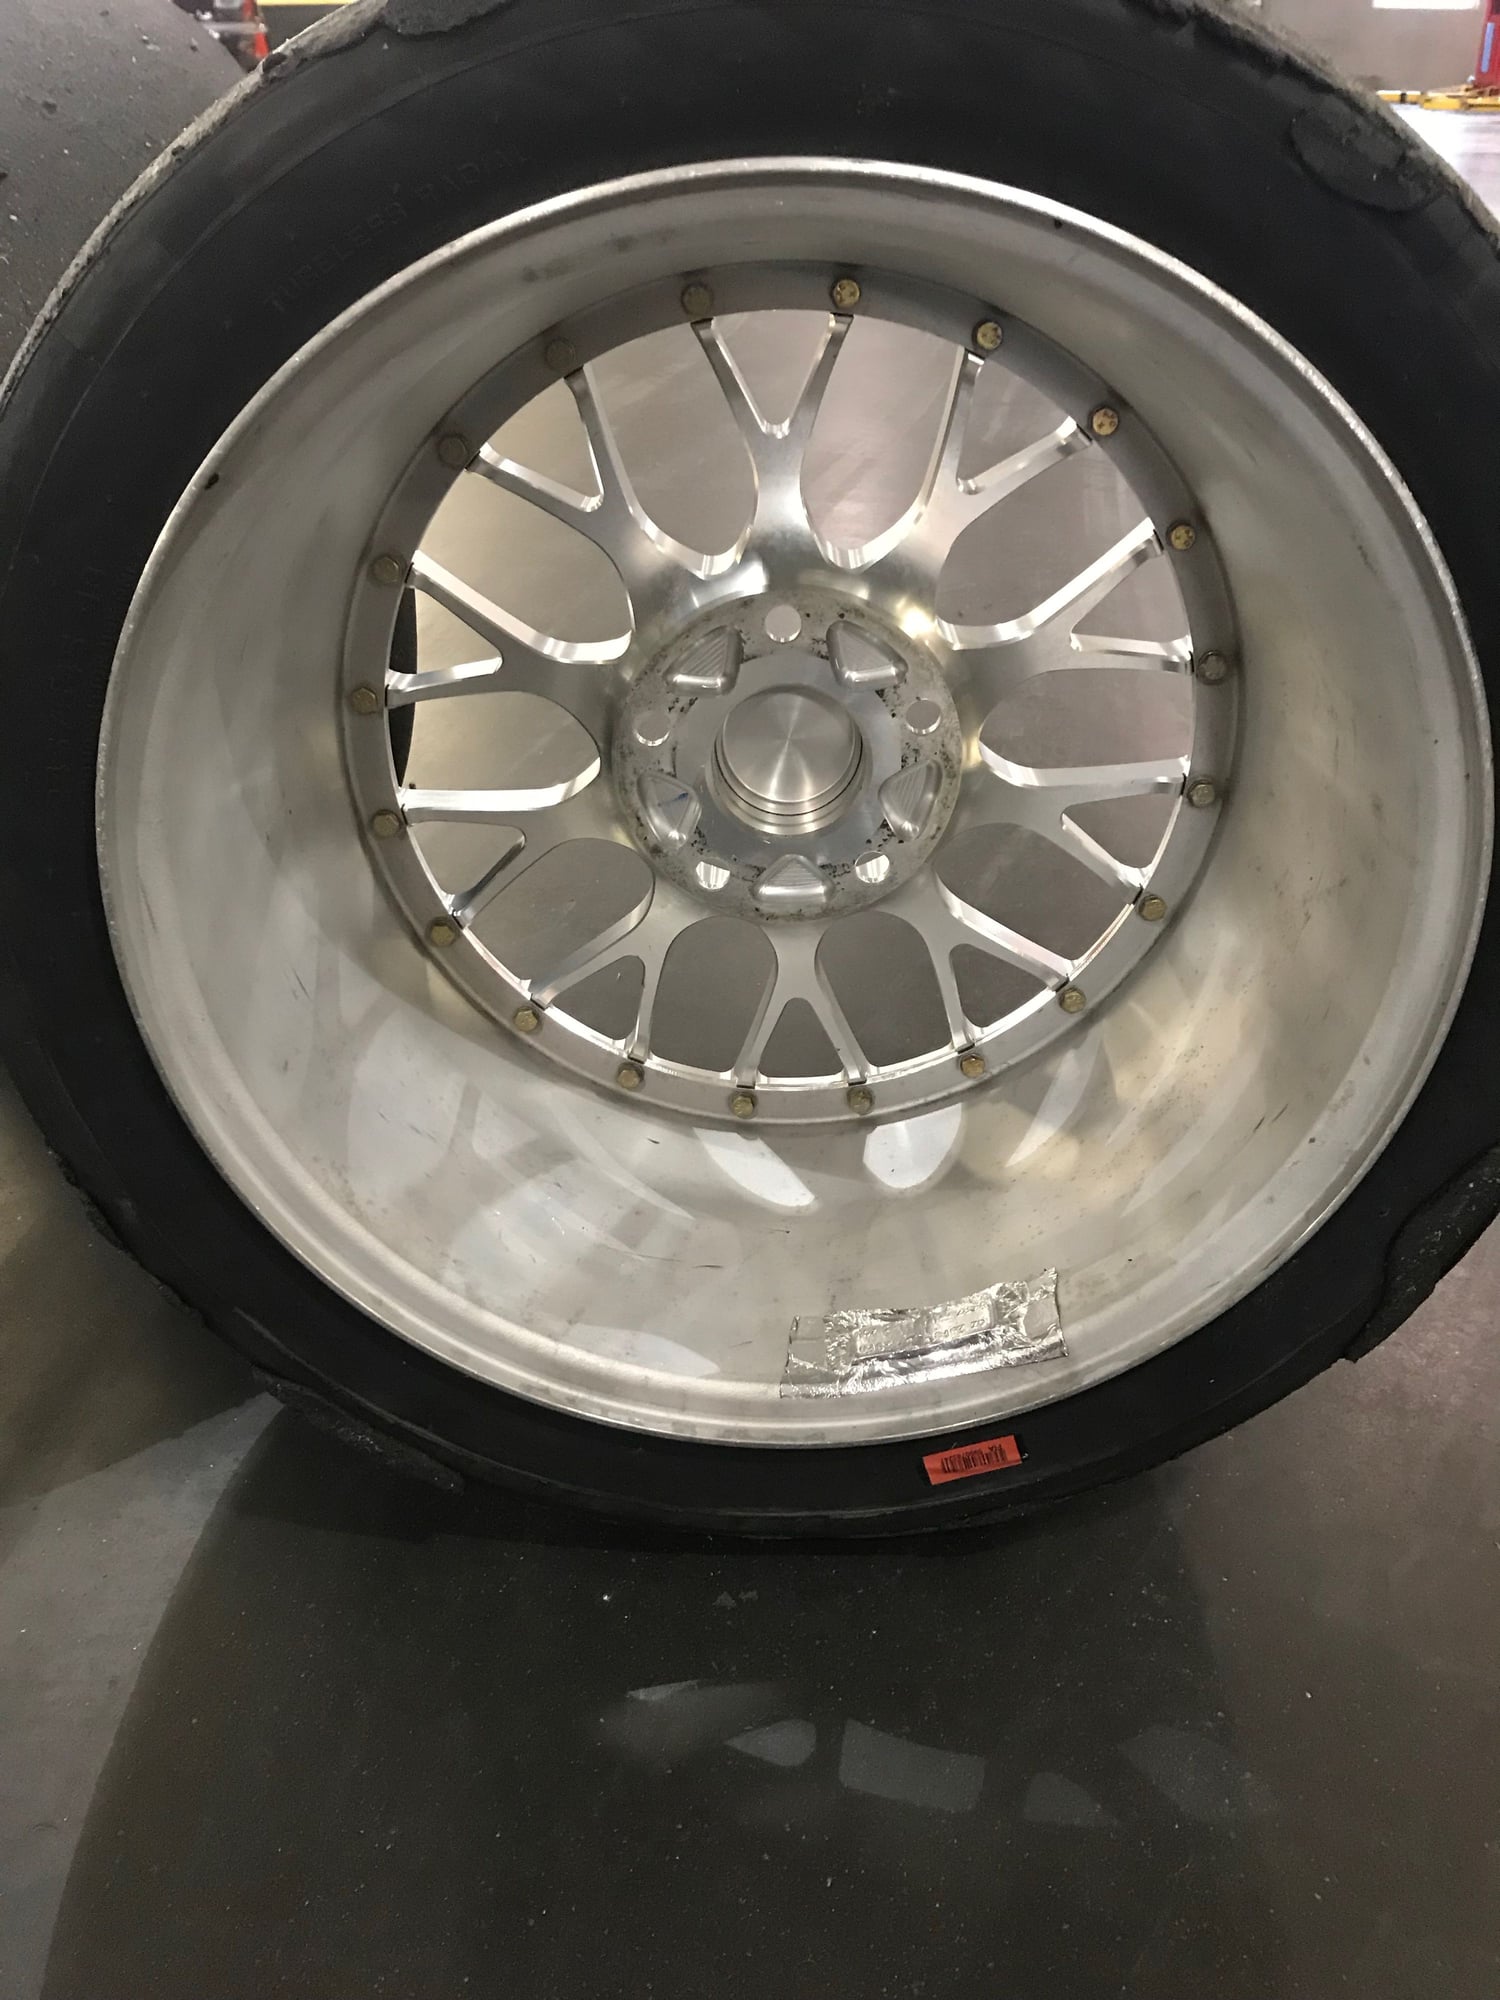 Wheels and Tires/Axles - Fikse 18"x8.5" & 18"x10" wheels for sale $2,500 each set of 4, New Condition! - Used - Birmingham, AL 35226, United States